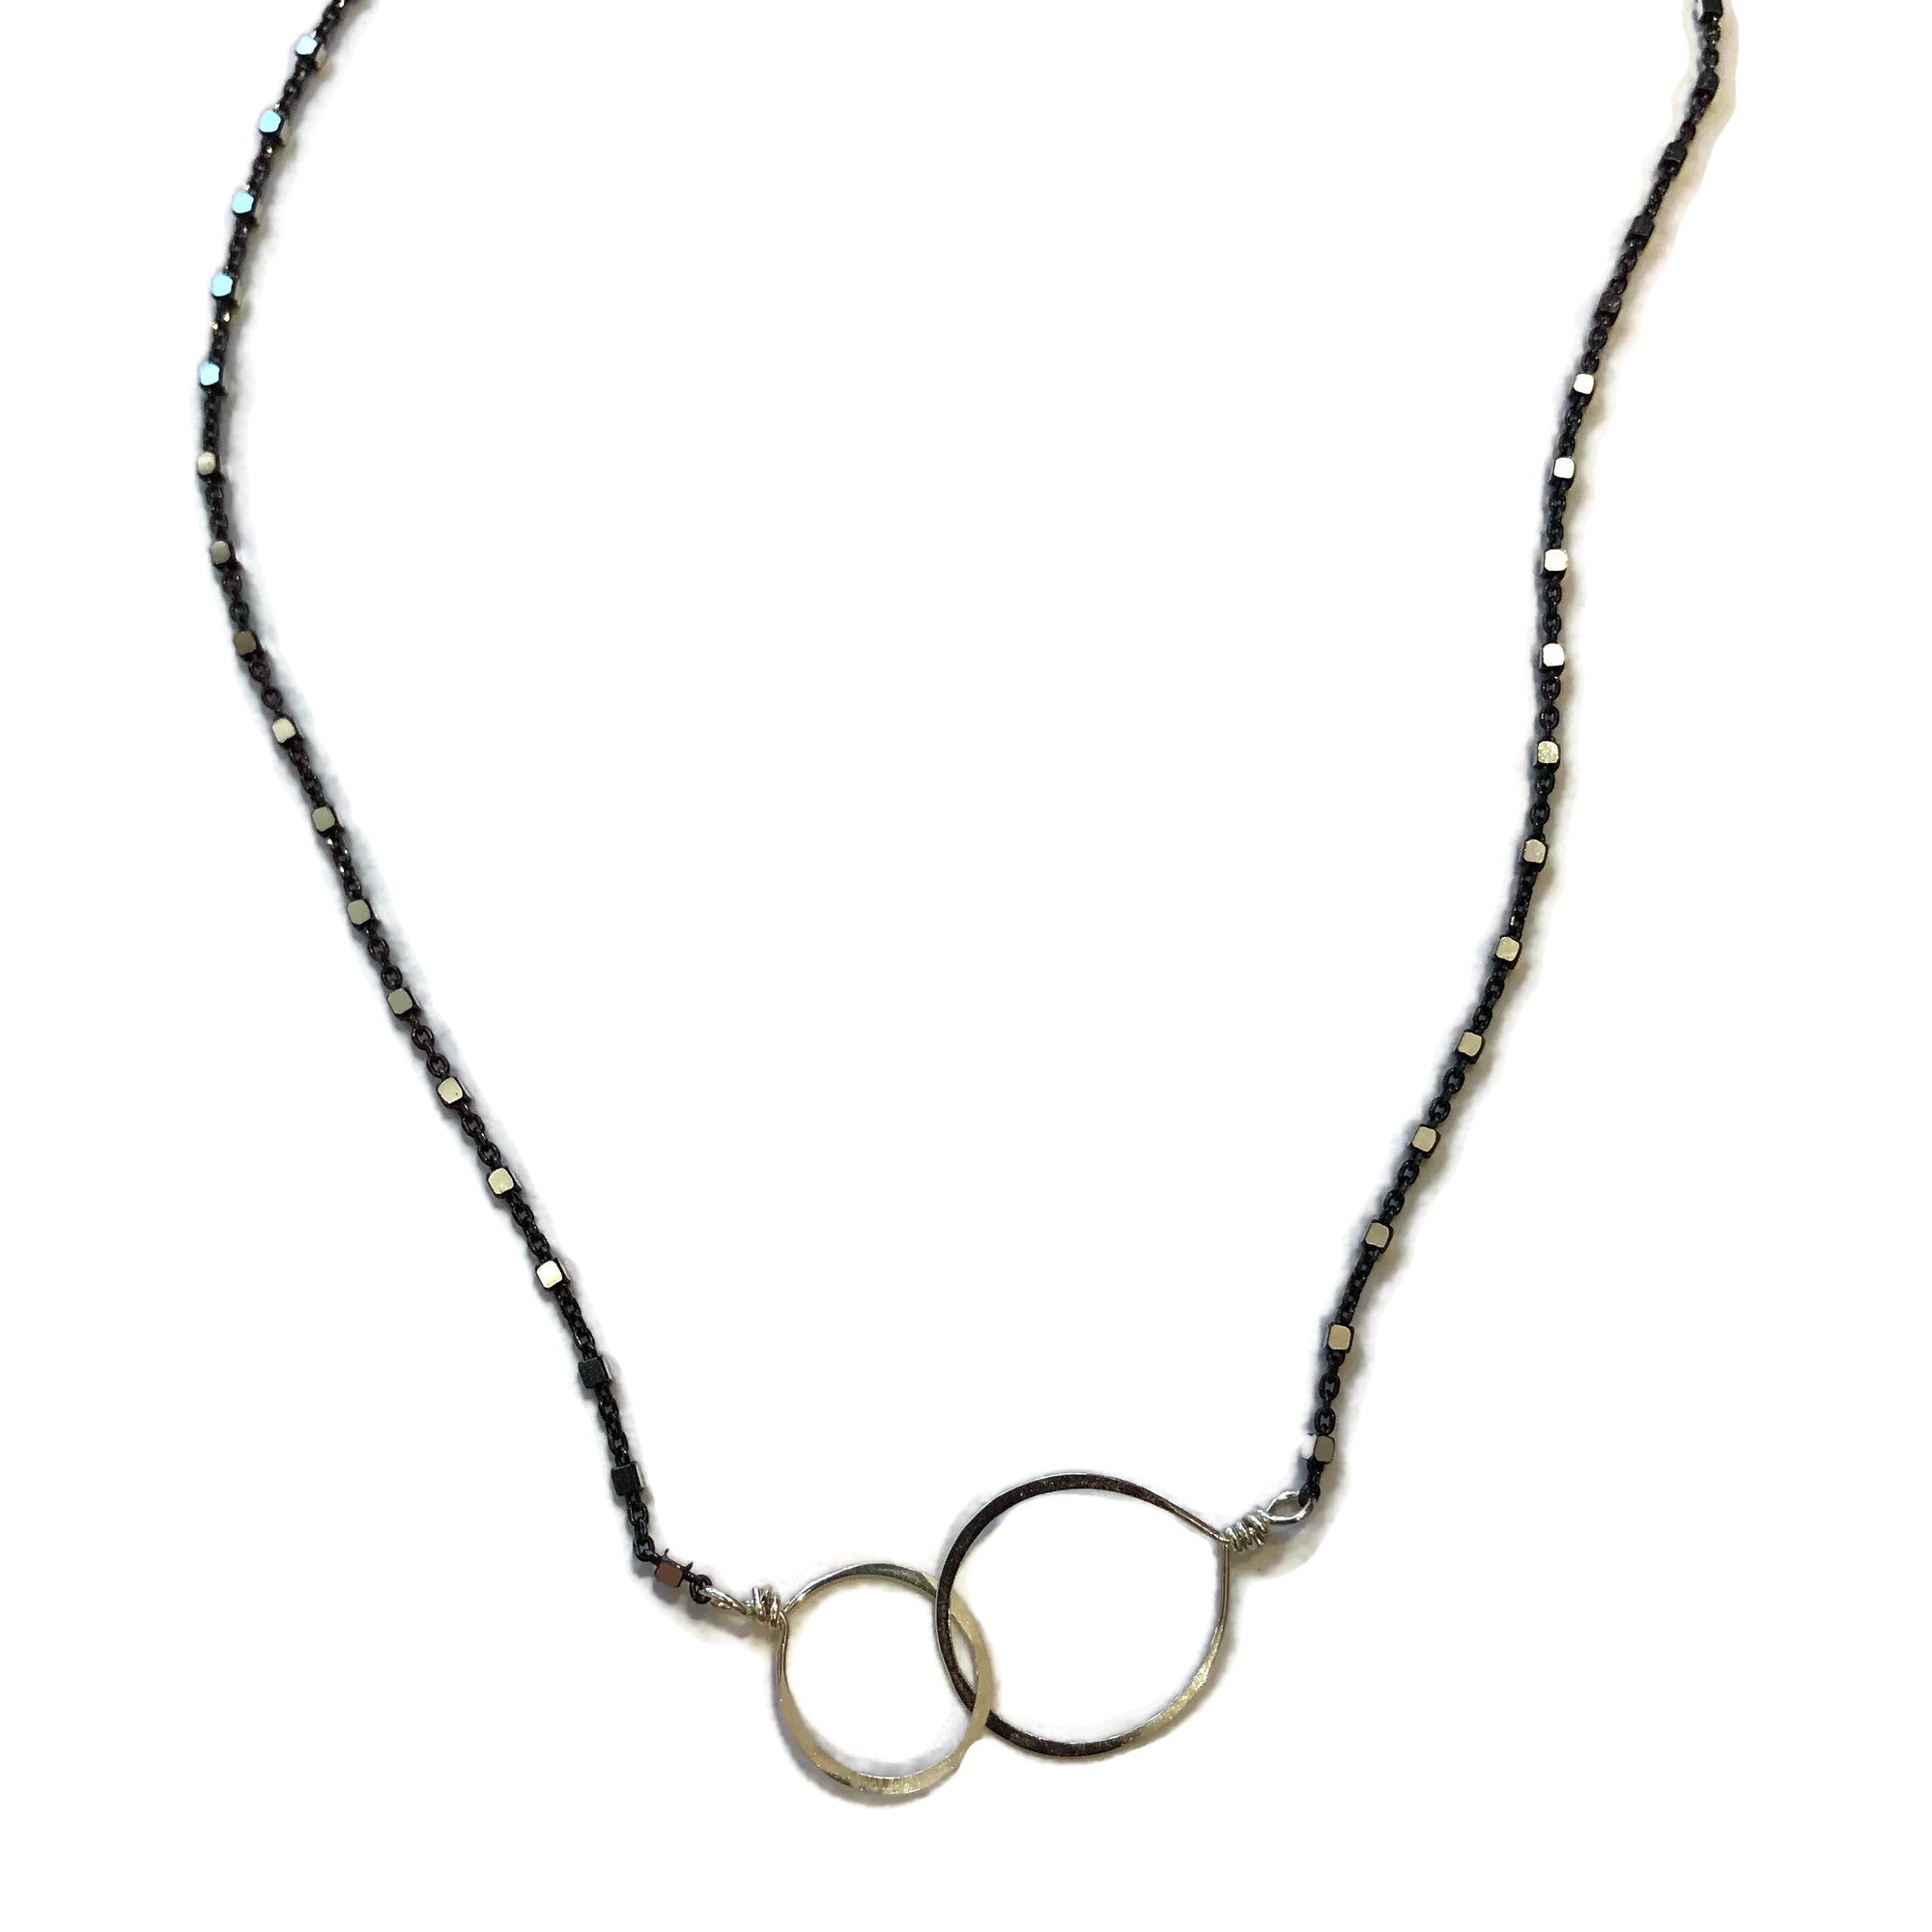 necklace with thin black chain with tiny silver beads featuring 2 hammered interlocking circles, beth jewelry